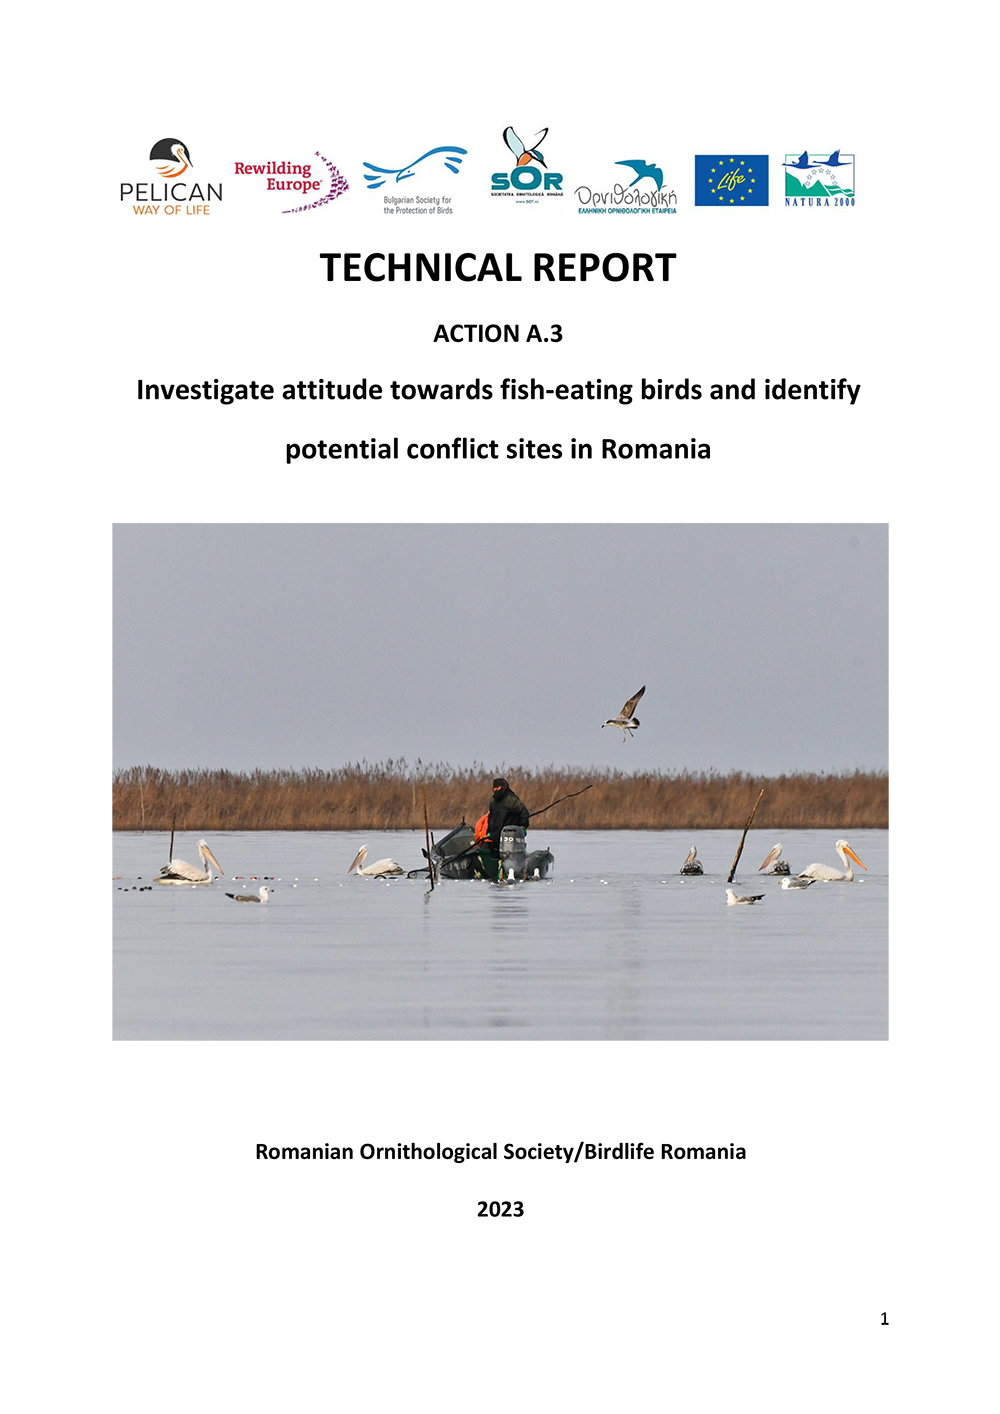 TECHNICAL REPORT «Investigate attitude towards fish-eating birds and identify potential conflict sites in Romania»